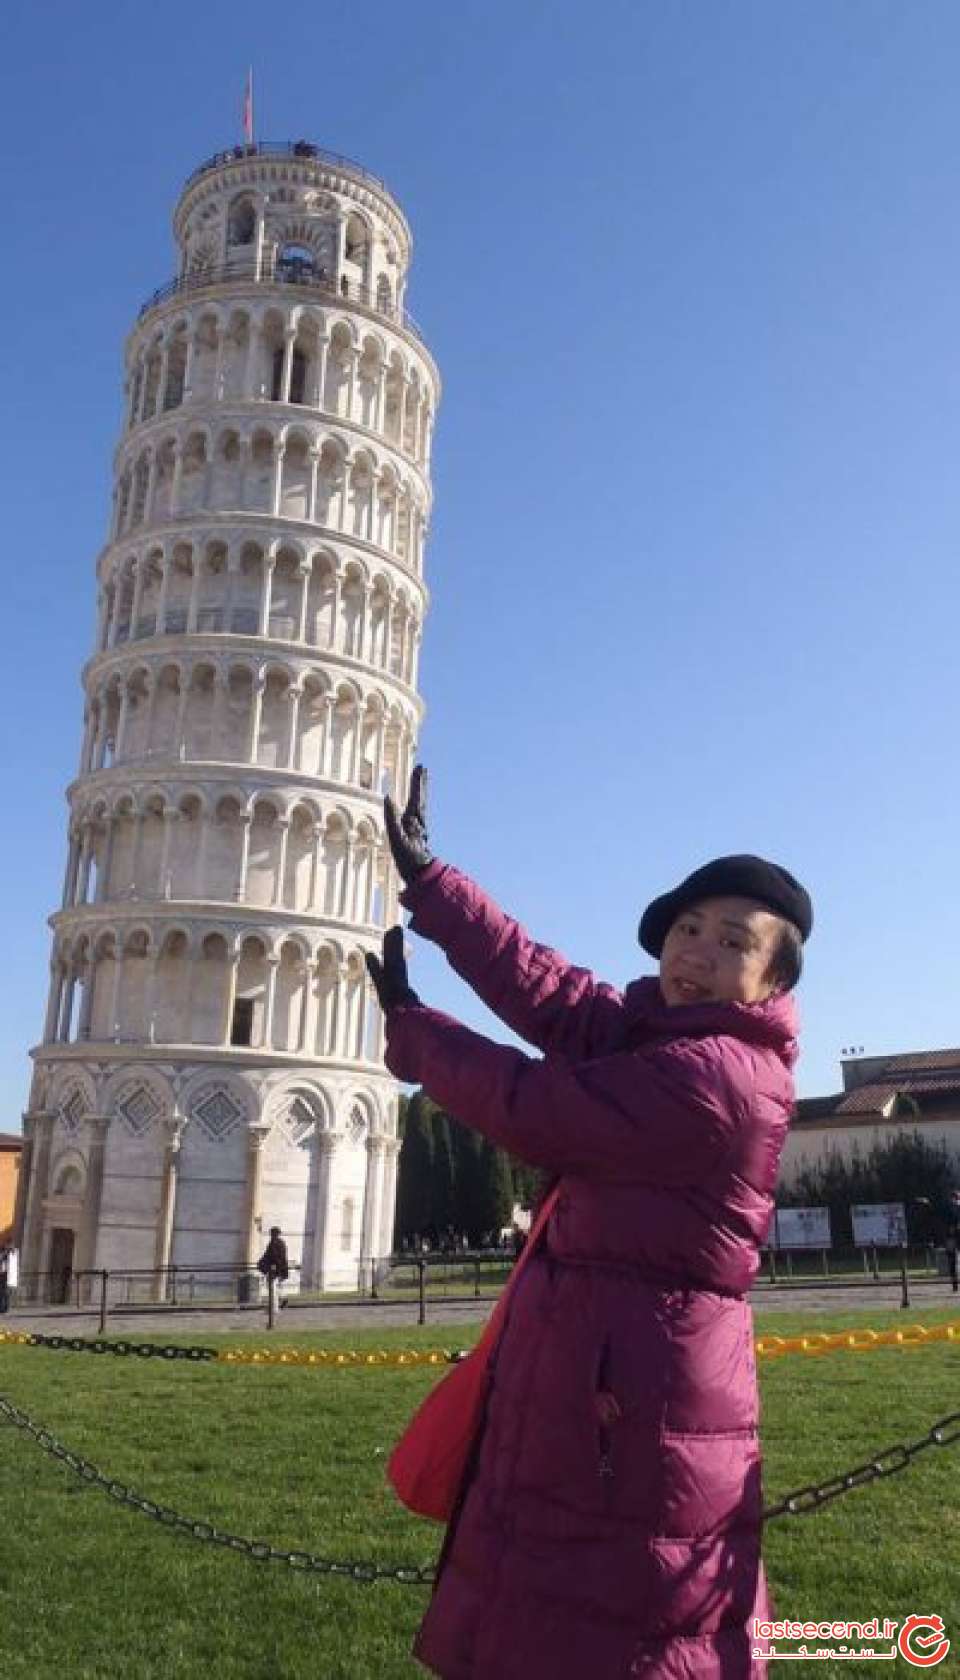 mum-and-the-leaning-tower-of-pisa-400x700.jpg